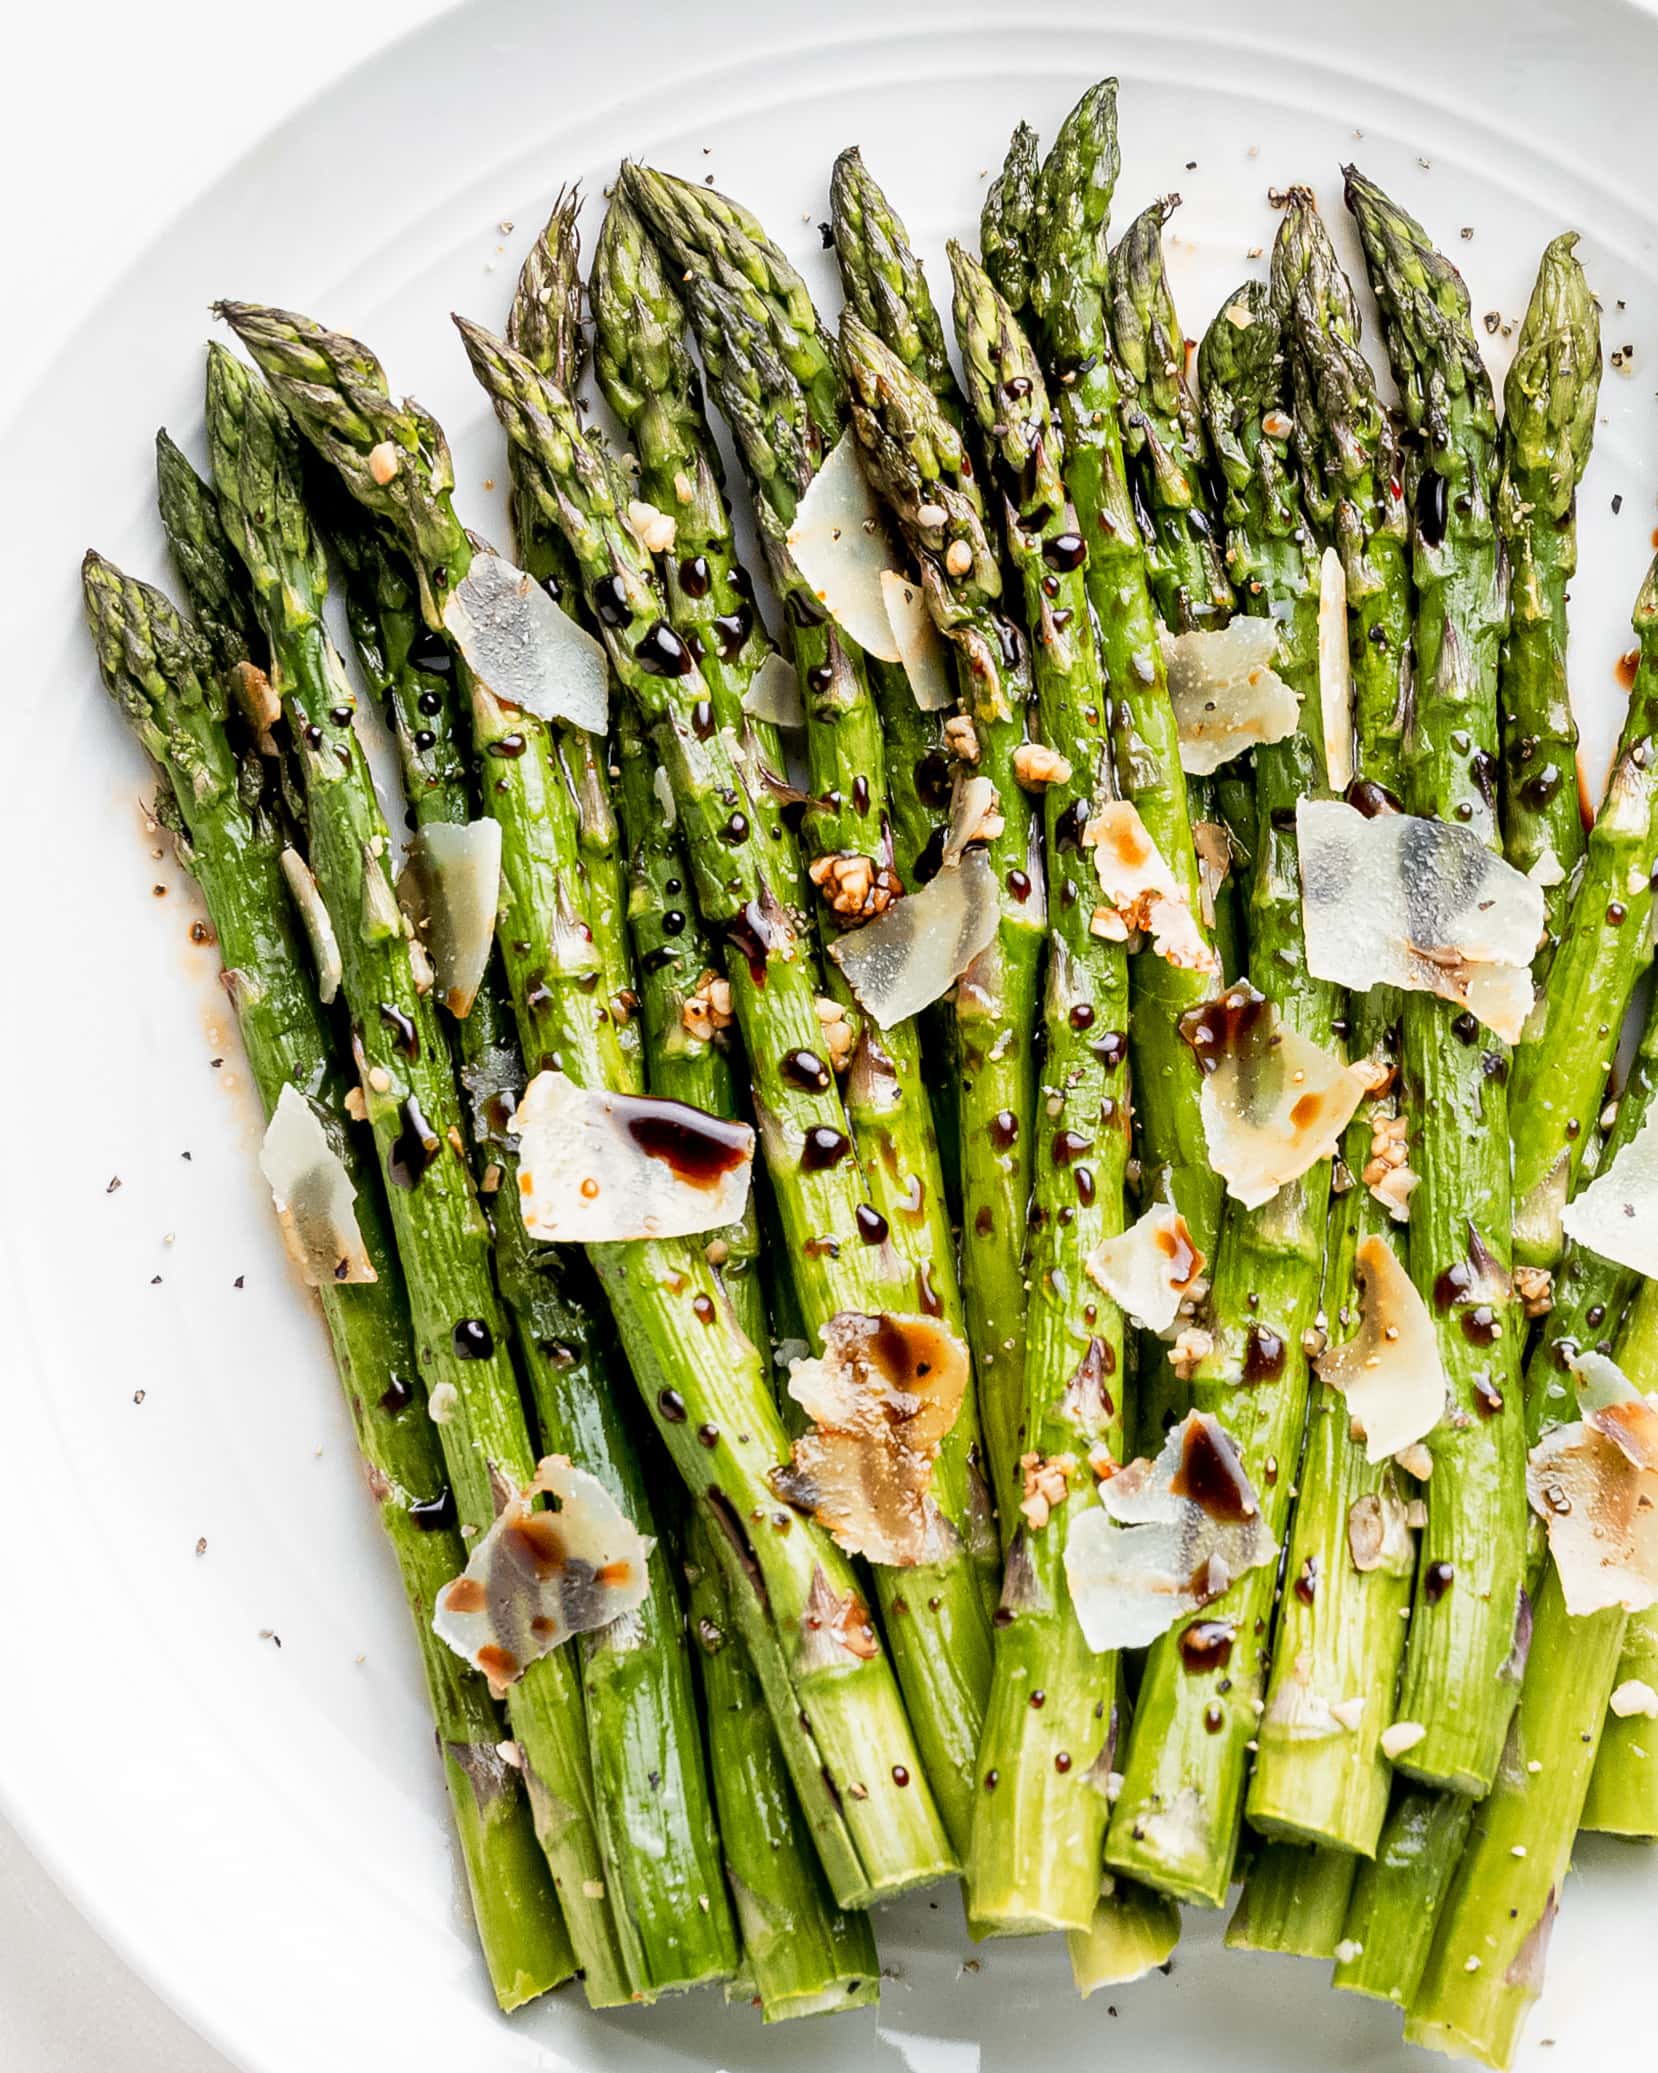 Asparagus with balsamic glaze on a white plate